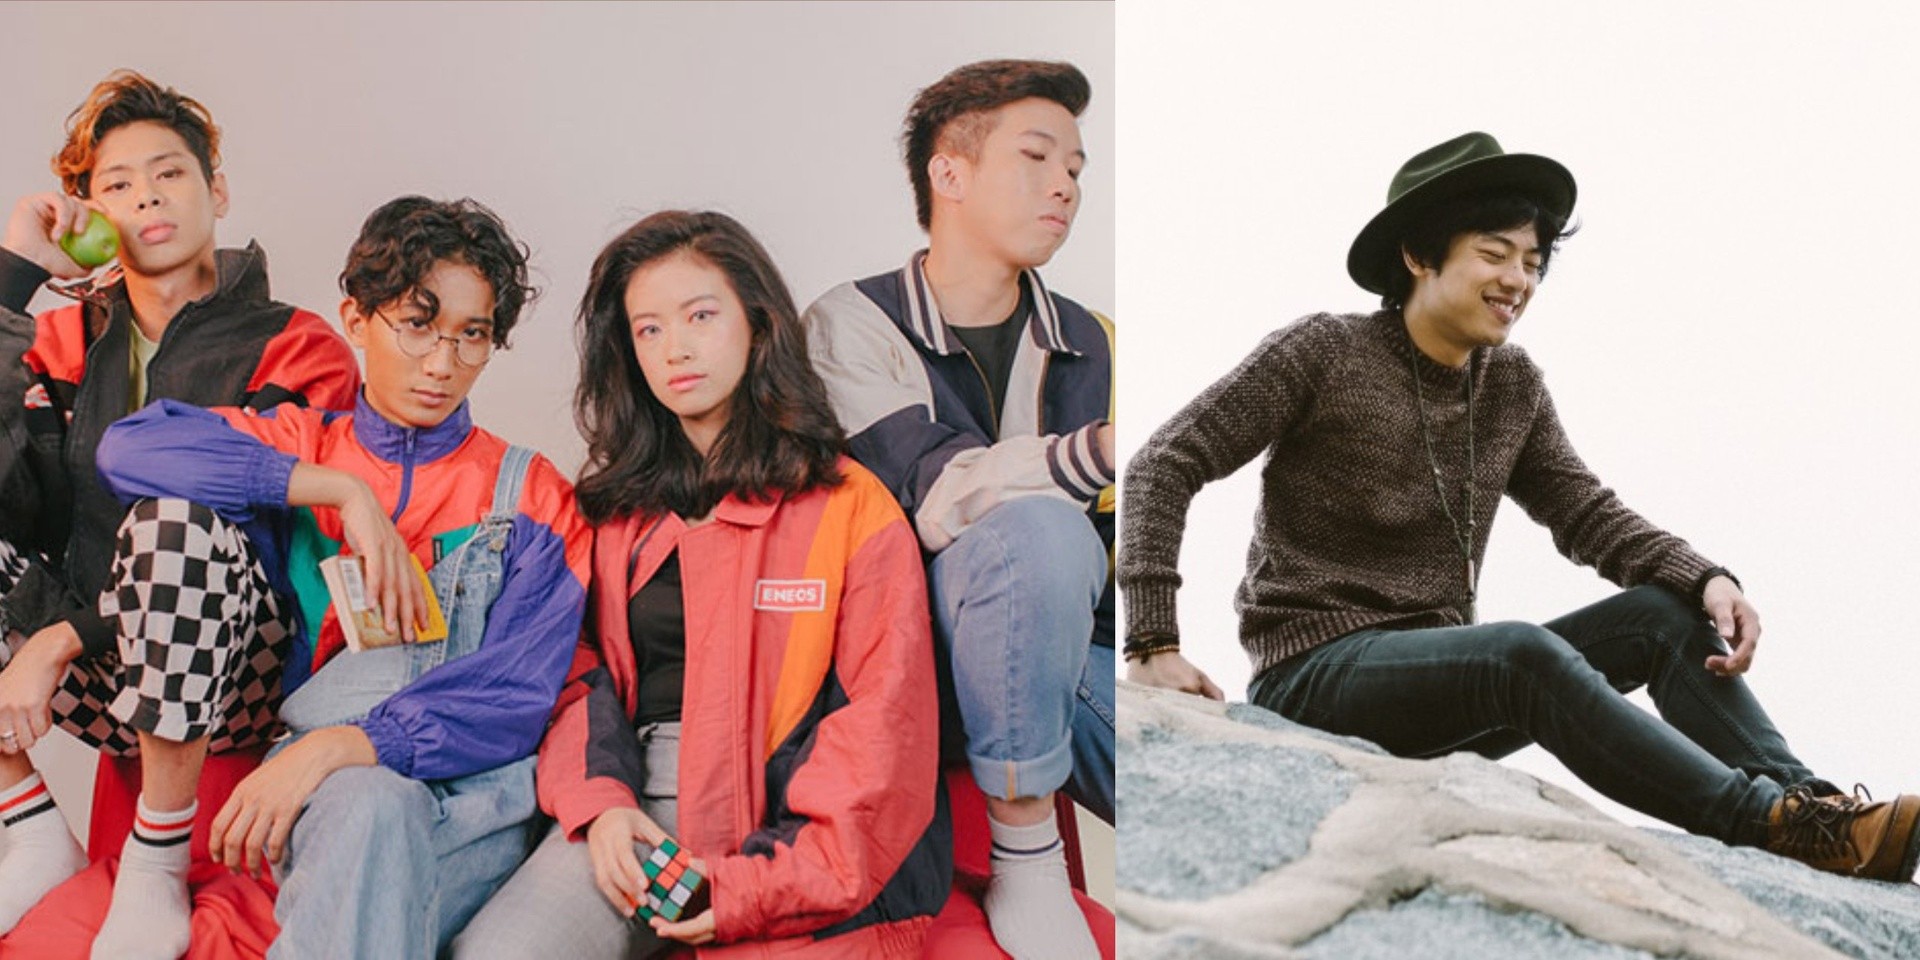 M1LDLIFE, Disco Hue, Dru Chen and more to perform benefit show for Noah's Ark Natural Animal Shelter